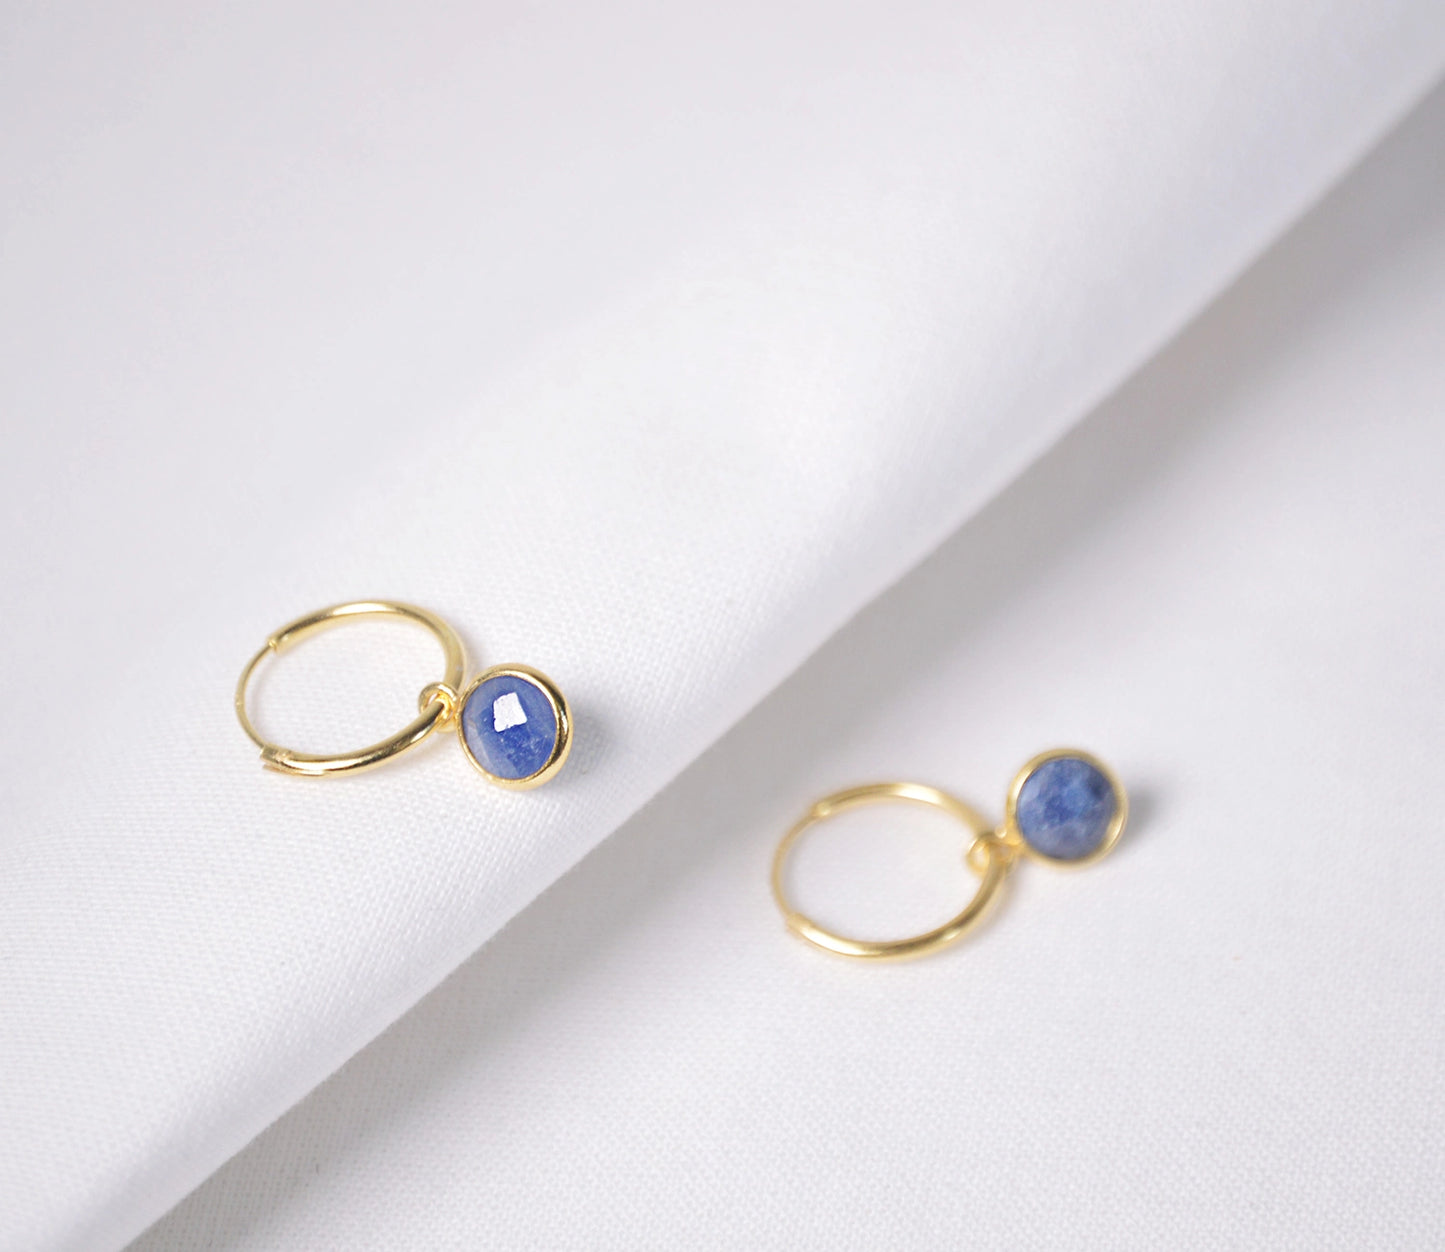 Thin gold hoop earrings with blue sapphire